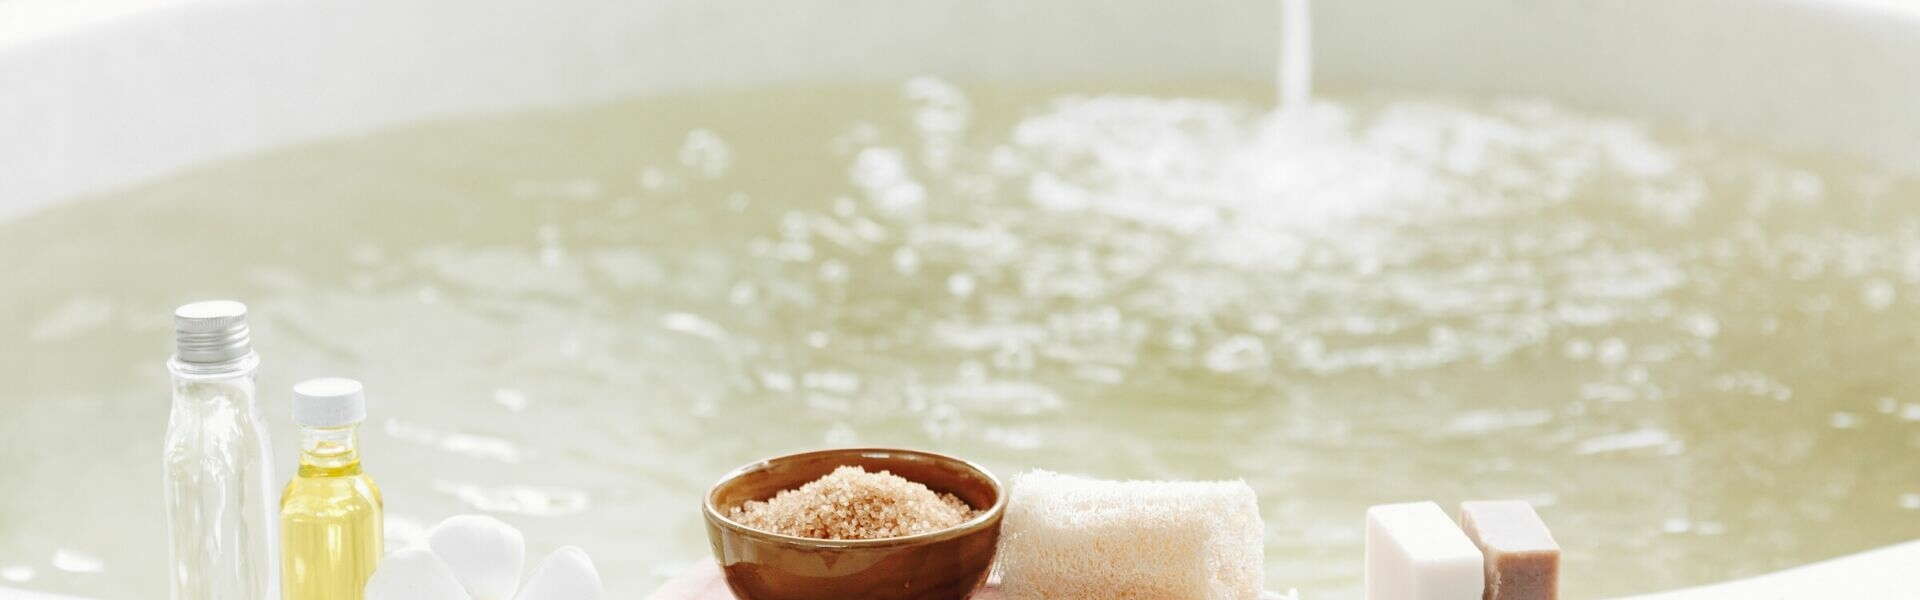 Detox bath | Get rid of toxins with these 3 simple ingredients!